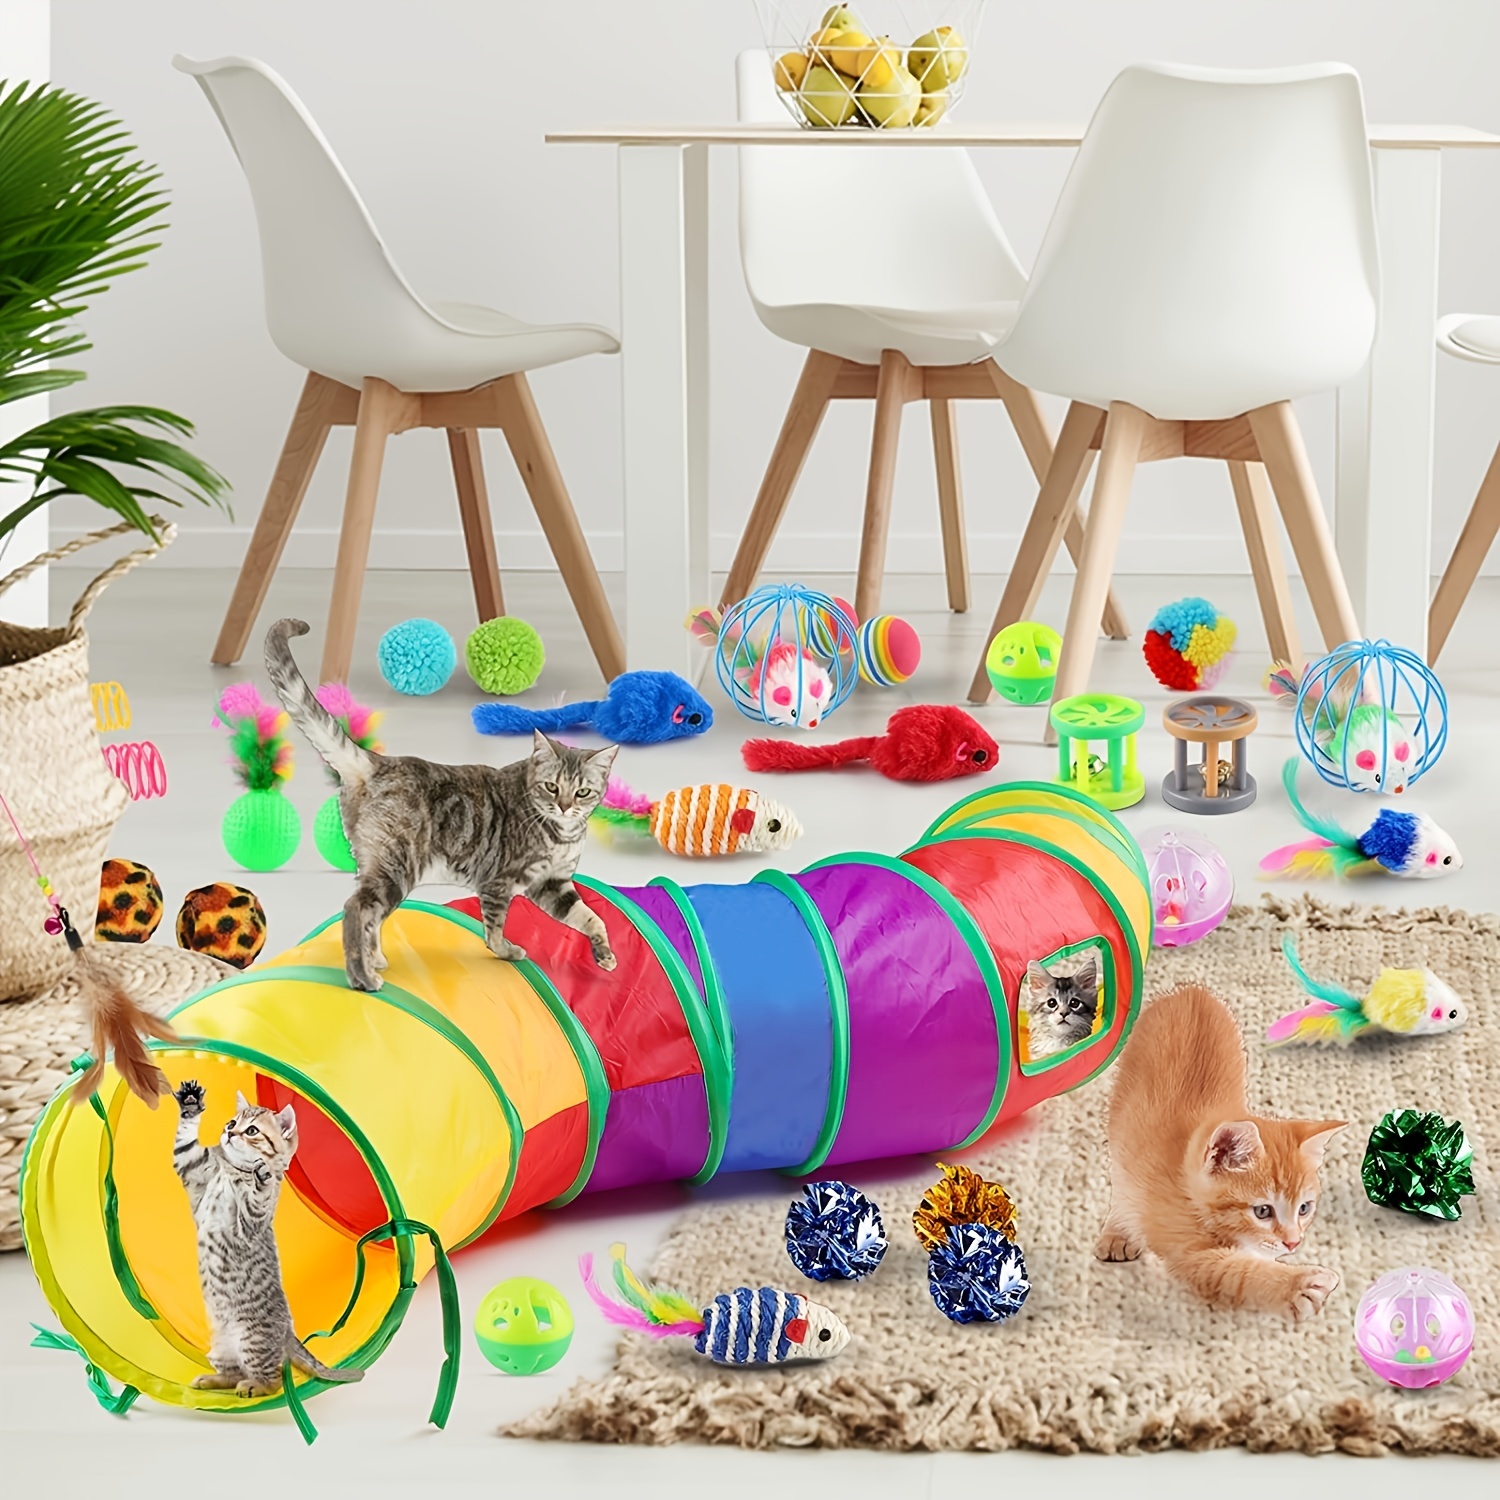 Interactive Cat Toy Set With Silvervine Matatabi Sticks For - Temu